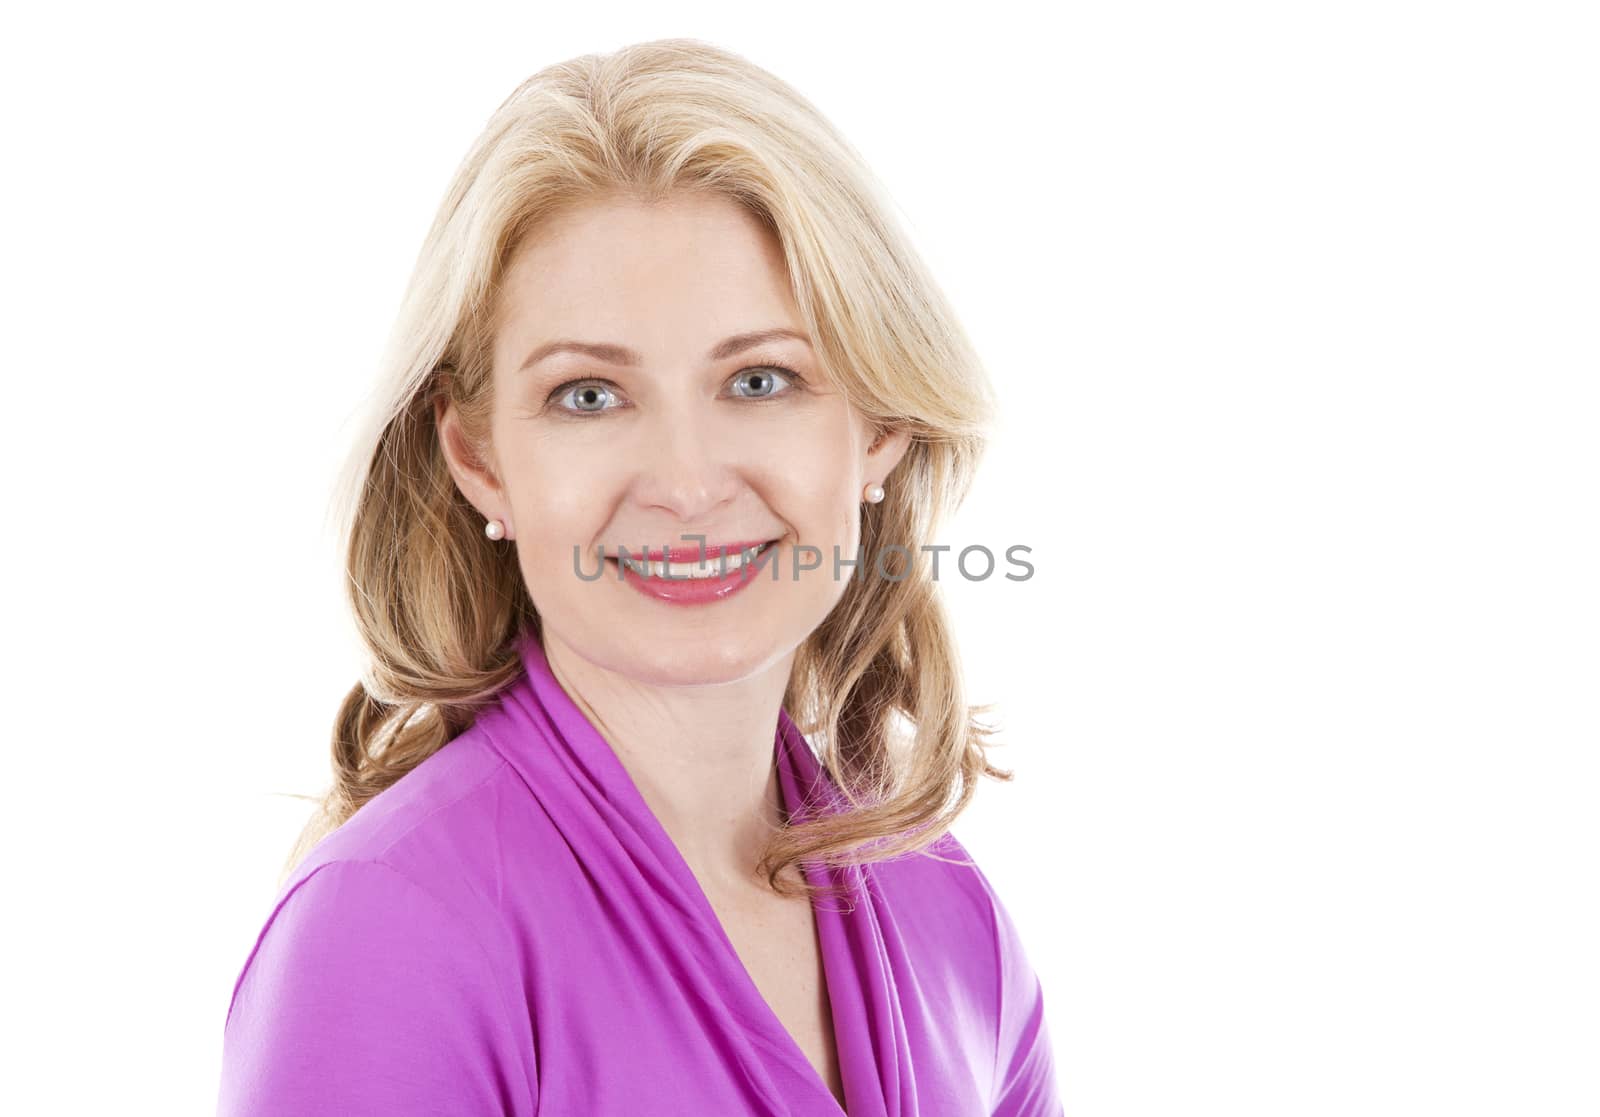 blond woman wearing pink top on white background